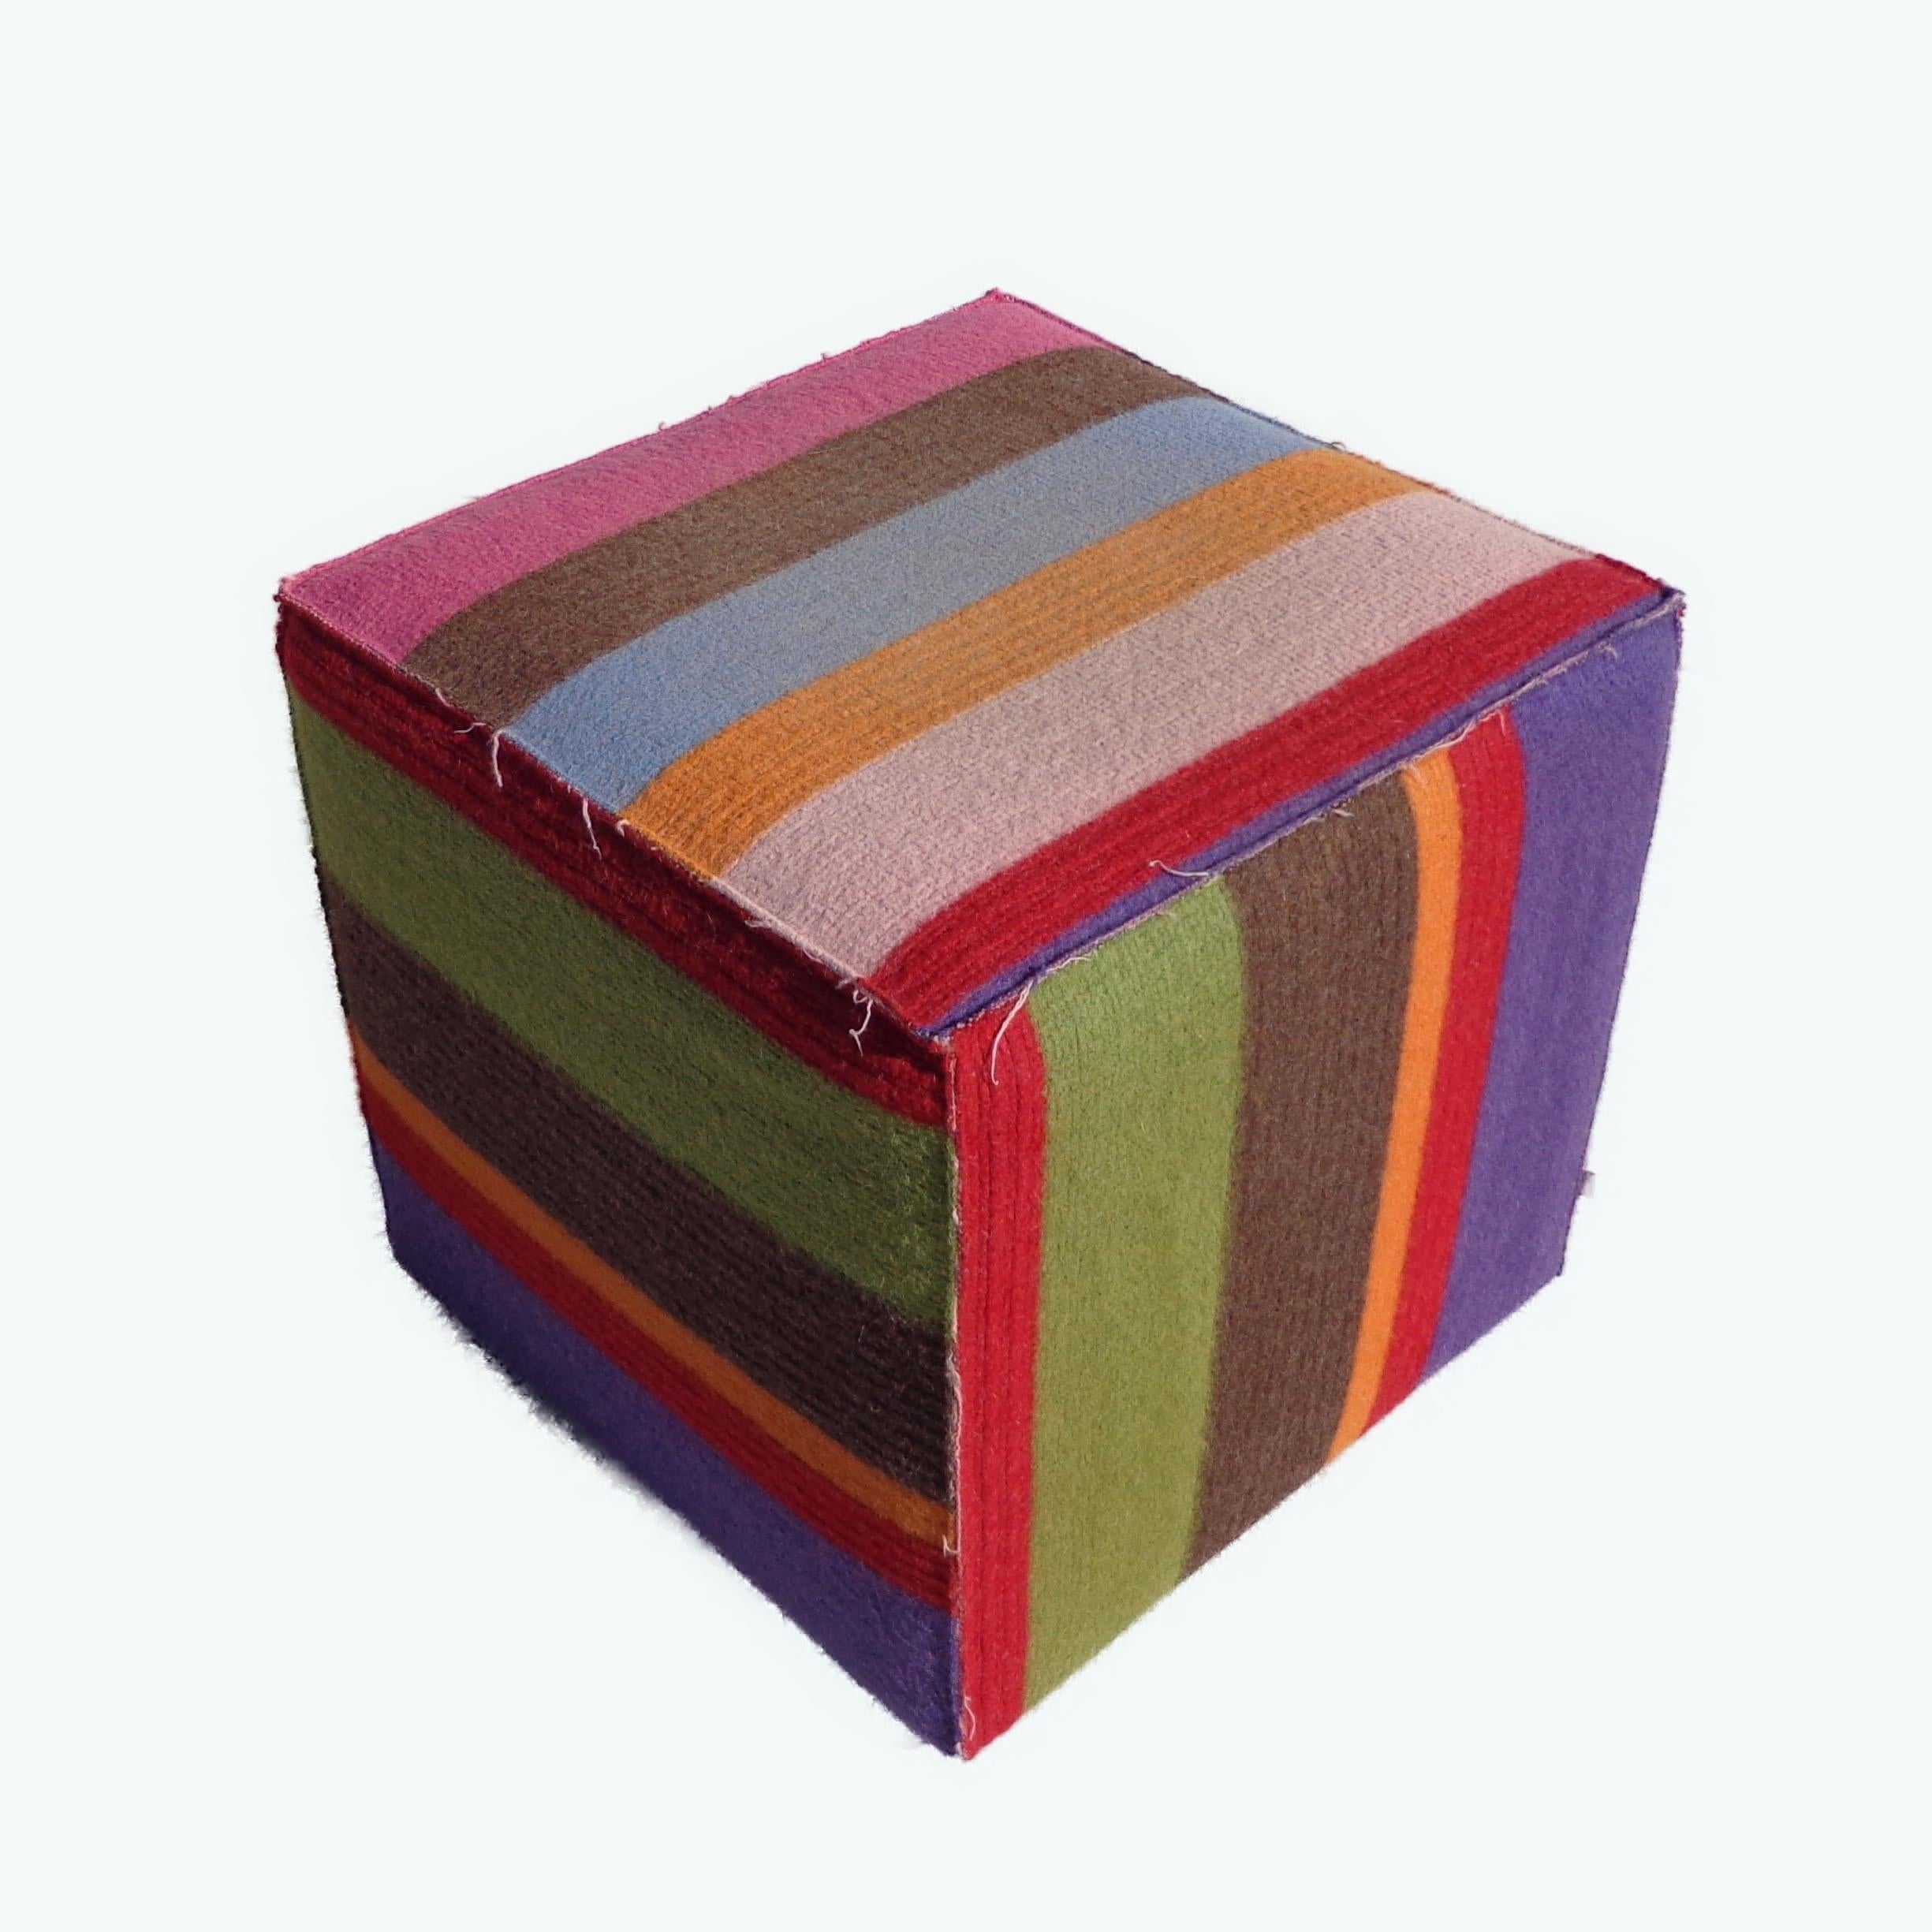 20? Missoni Cube ottoman

Rich striped cubed in wool. Marked Missoni. Measure: 20″.

 
 